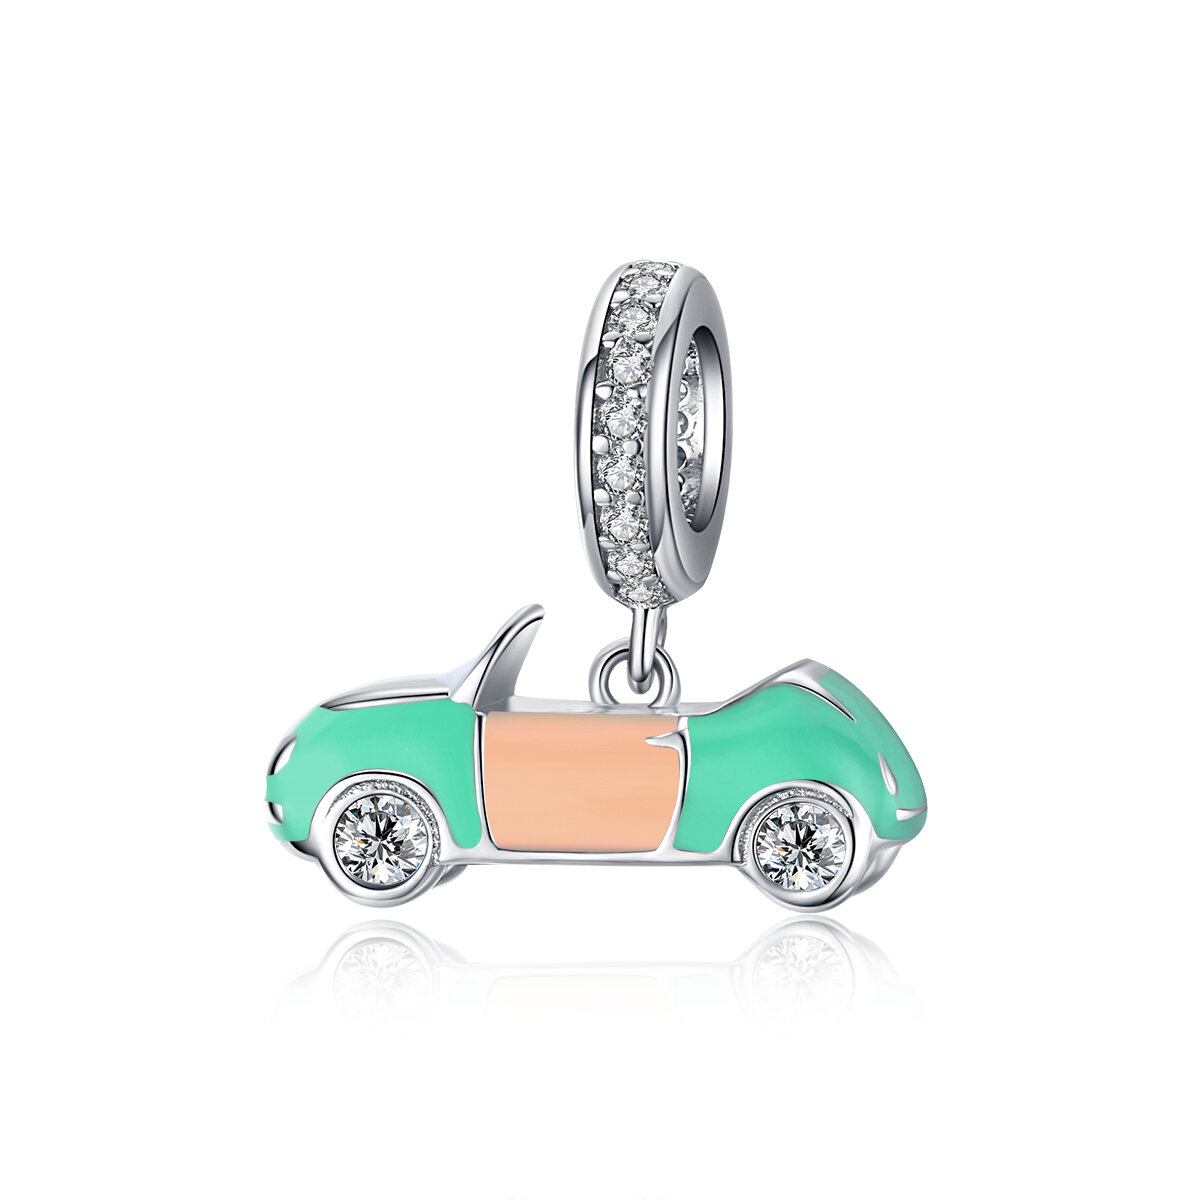 GemKing BSC155 Convertible open car S925 Sterling Silver Charm